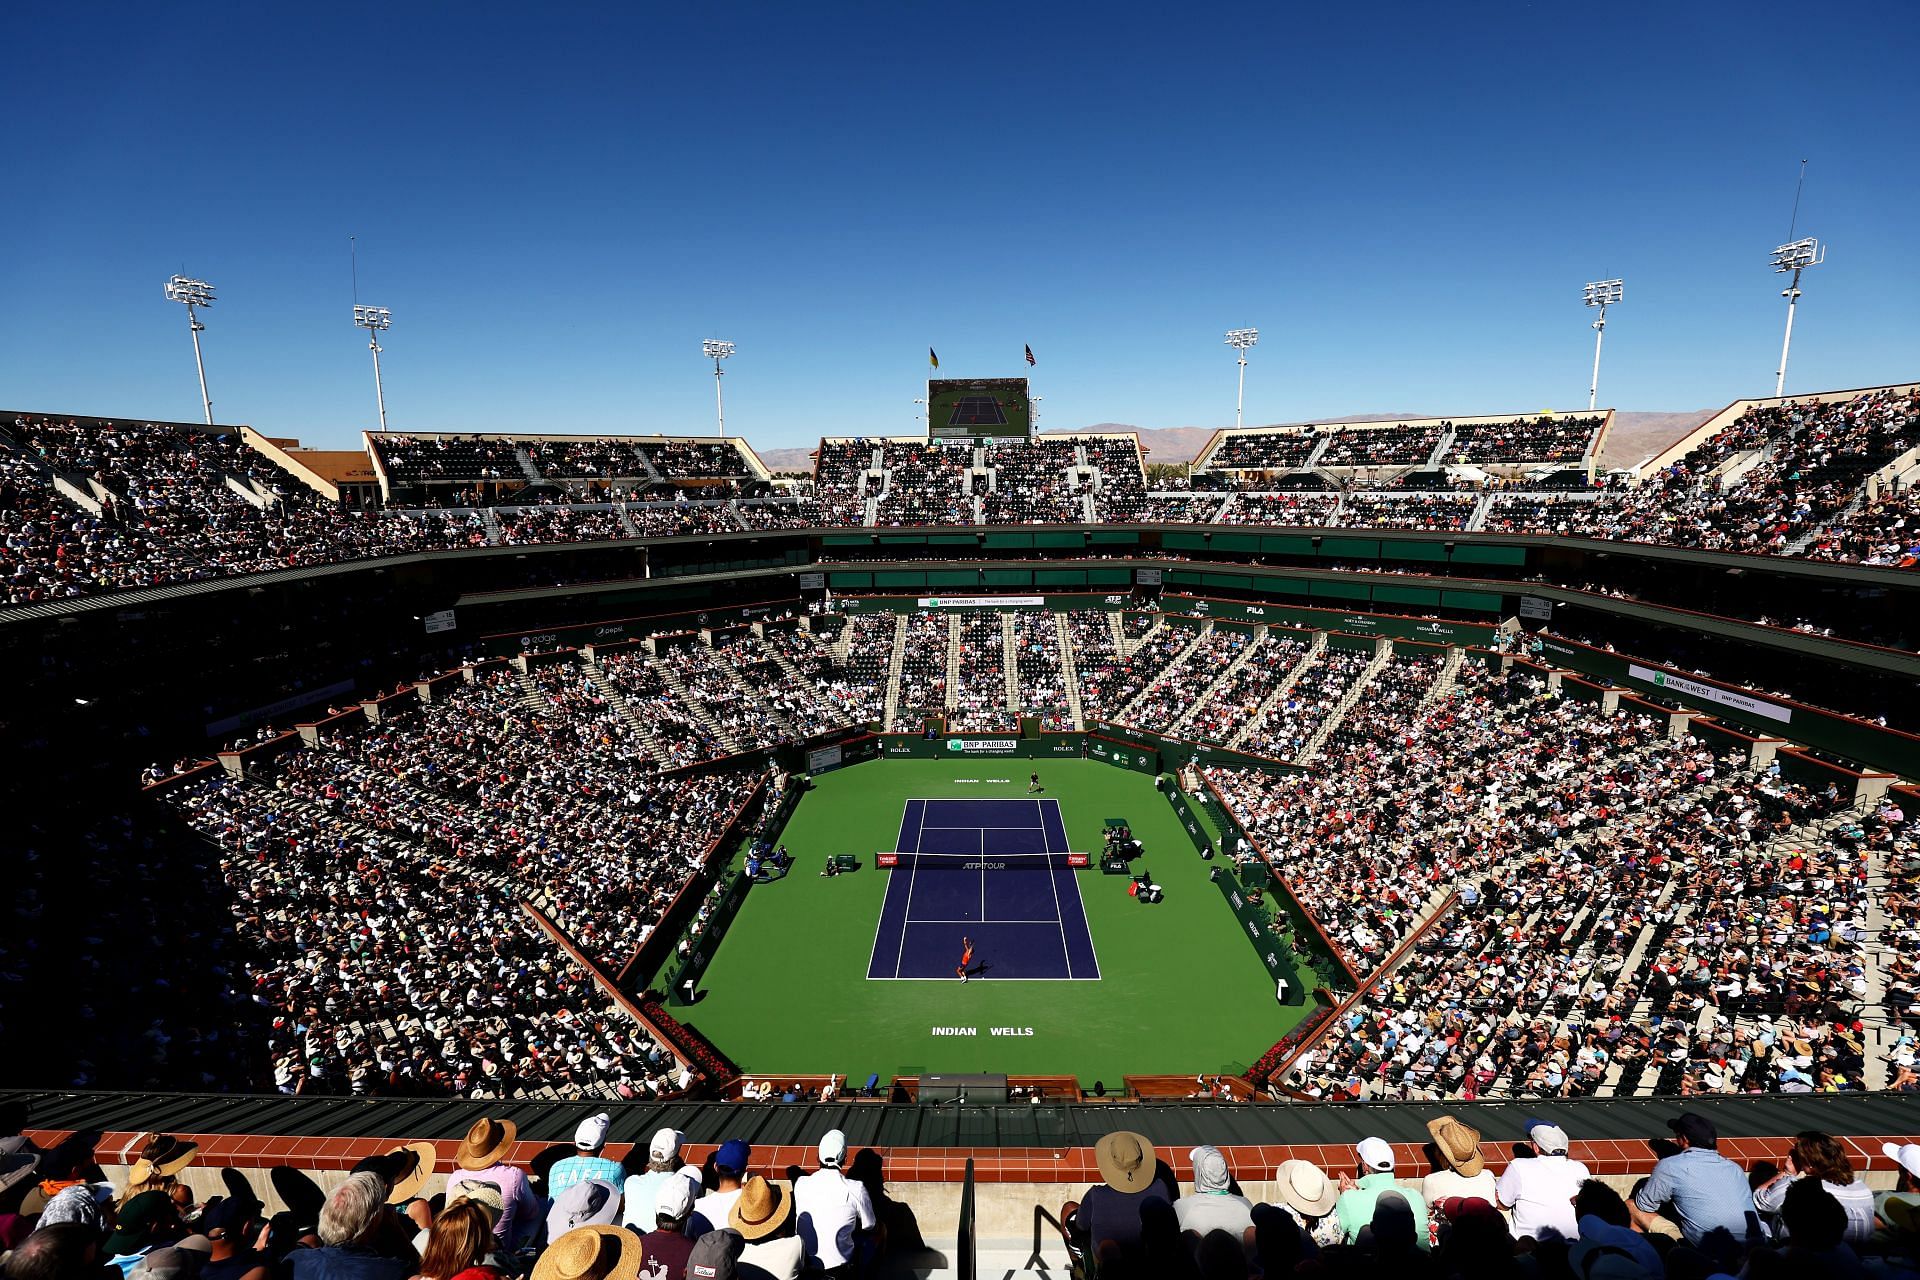 A general view of Stadium One at the Indian Wells Tennis Garden.